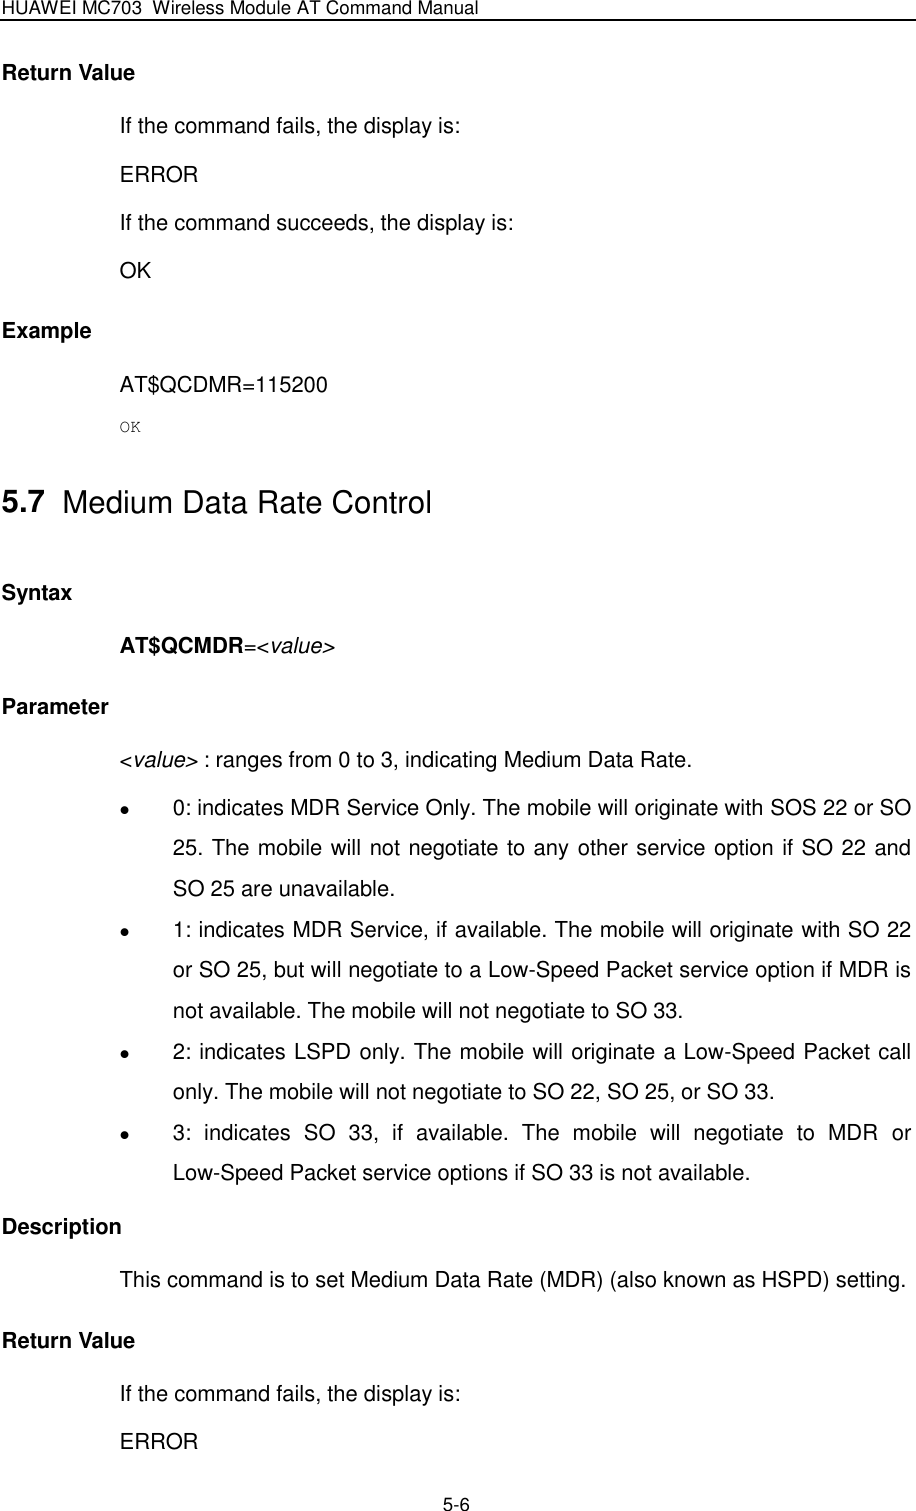 HUAWEI MC703 Wireless Module AT Command Manual   5-6 Return Value If the command fails, the display is: ERROR If the command succeeds, the display is: OK Example AT$QCDMR=115200 OK 5.7  Medium Data Rate Control Syntax AT$QCMDR=&lt;value&gt; Parameter &lt;value&gt; : ranges from 0 to 3, indicating Medium Data Rate.  0: indicates MDR Service Only. The mobile will originate with SOS 22 or SO 25. The mobile will not negotiate to any other service option if SO 22 and SO 25 are unavailable.  1: indicates MDR Service, if available. The mobile will originate with SO 22 or SO 25, but will negotiate to a Low-Speed Packet service option if MDR is not available. The mobile will not negotiate to SO 33.  2: indicates LSPD only. The mobile will originate a Low-Speed Packet call only. The mobile will not negotiate to SO 22, SO 25, or SO 33.  3:  indicates  SO  33,  if  available.  The  mobile  will  negotiate  to  MDR  or Low-Speed Packet service options if SO 33 is not available.   Description This command is to set Medium Data Rate (MDR) (also known as HSPD) setting. Return Value If the command fails, the display is: ERROR 